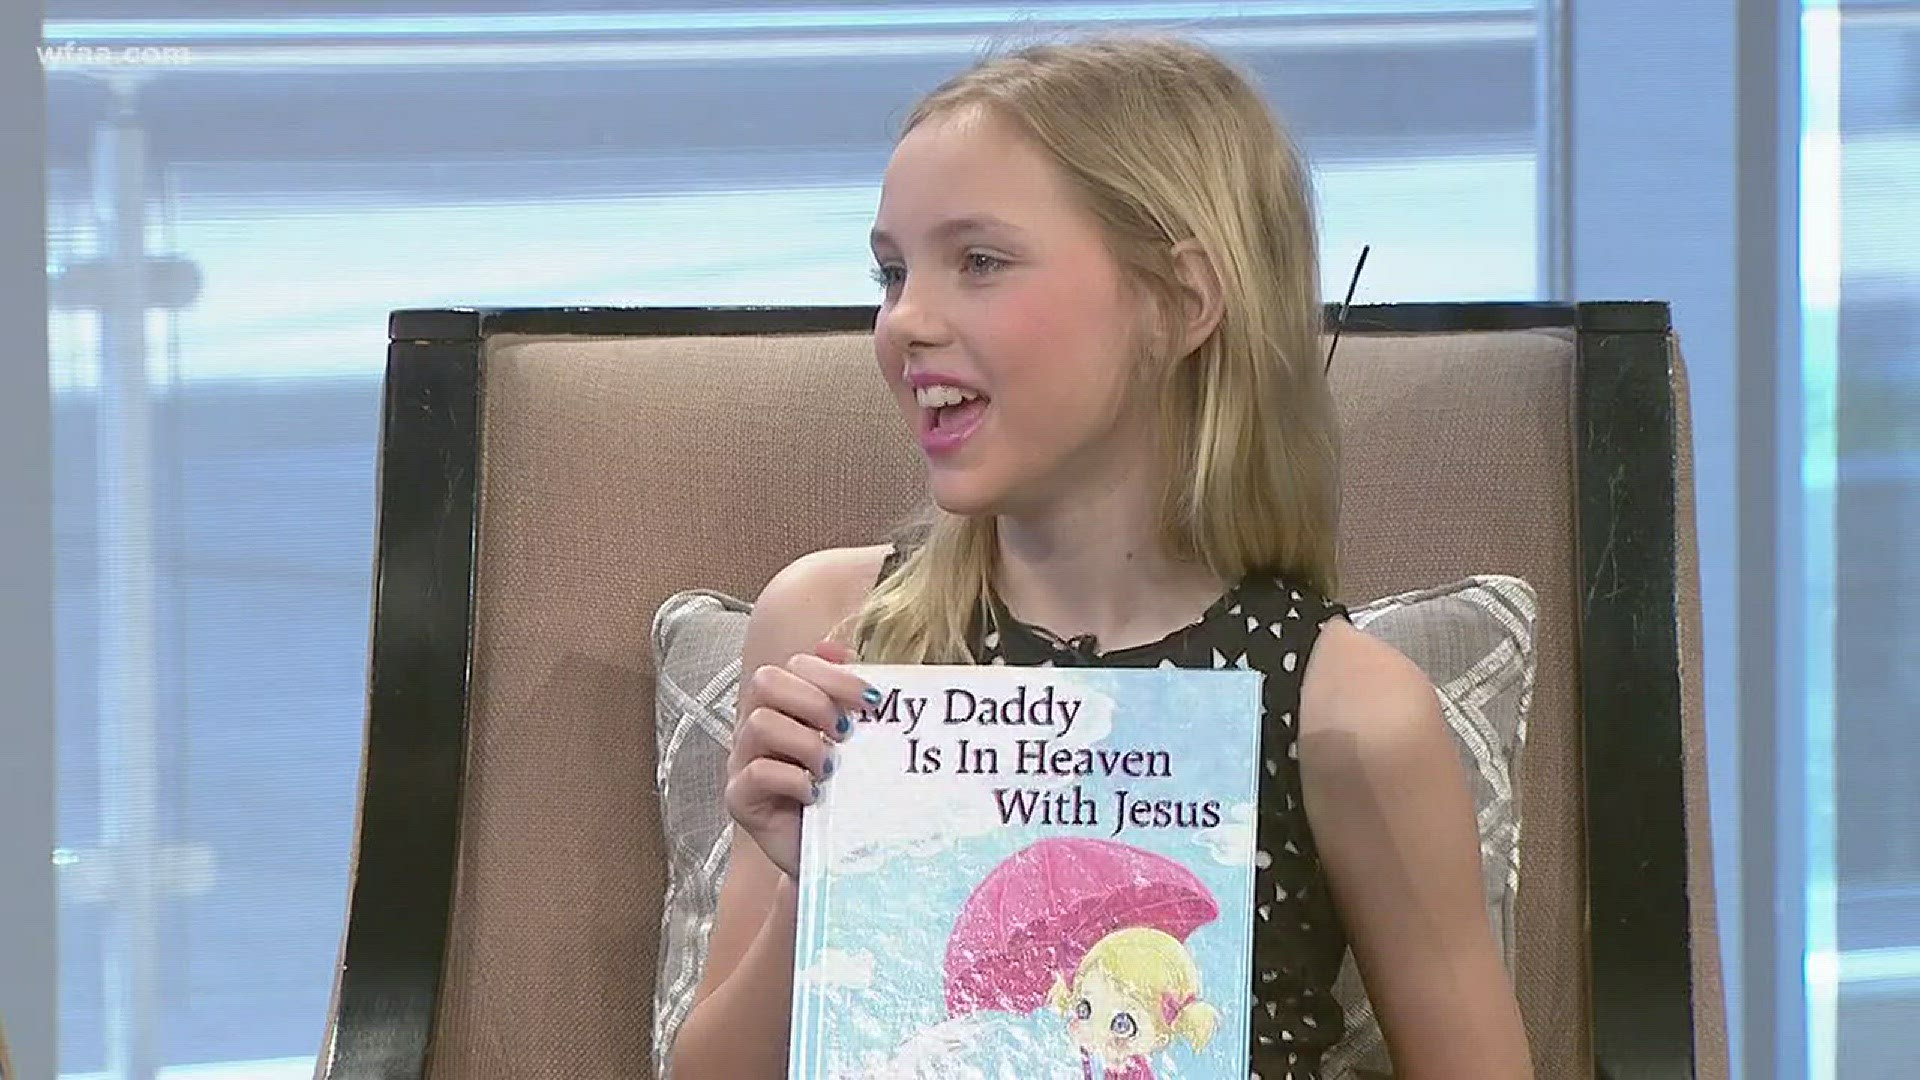 From book to movie: My Daddy is in Heaven with Jesus